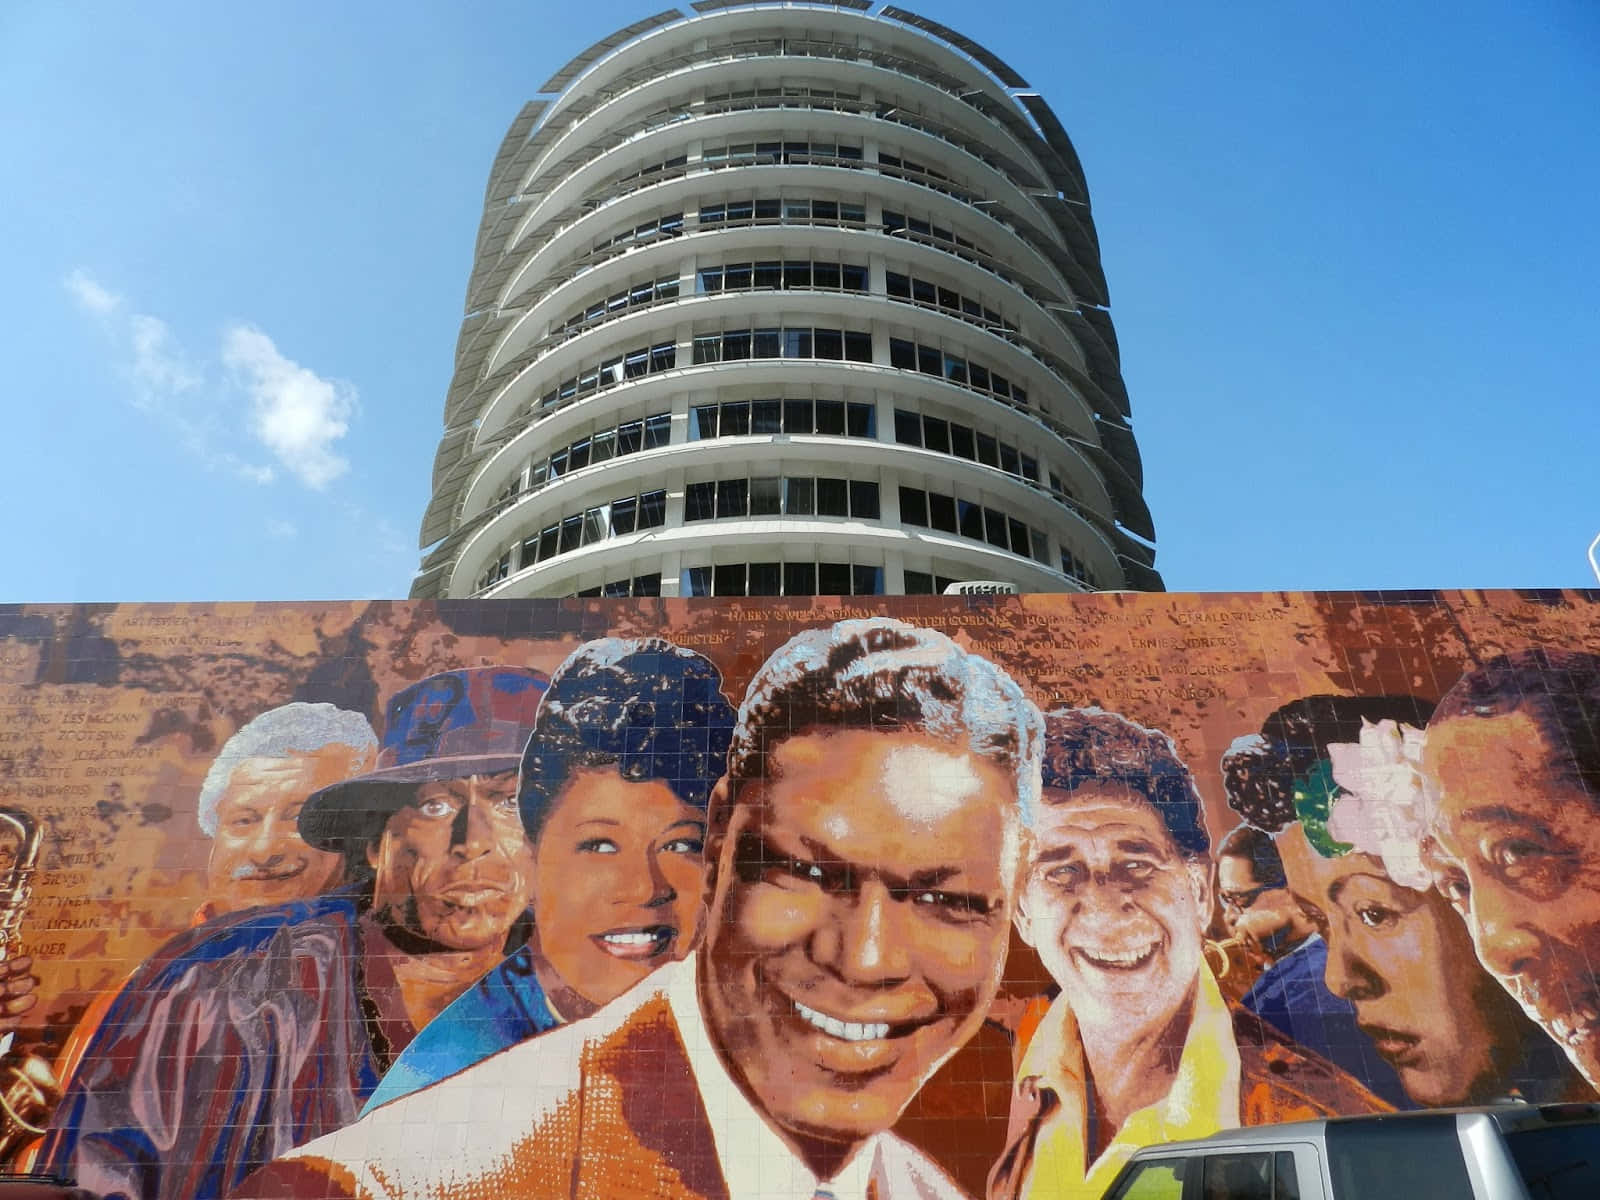 Mural Painting At Capitol Records Building Wallpaper